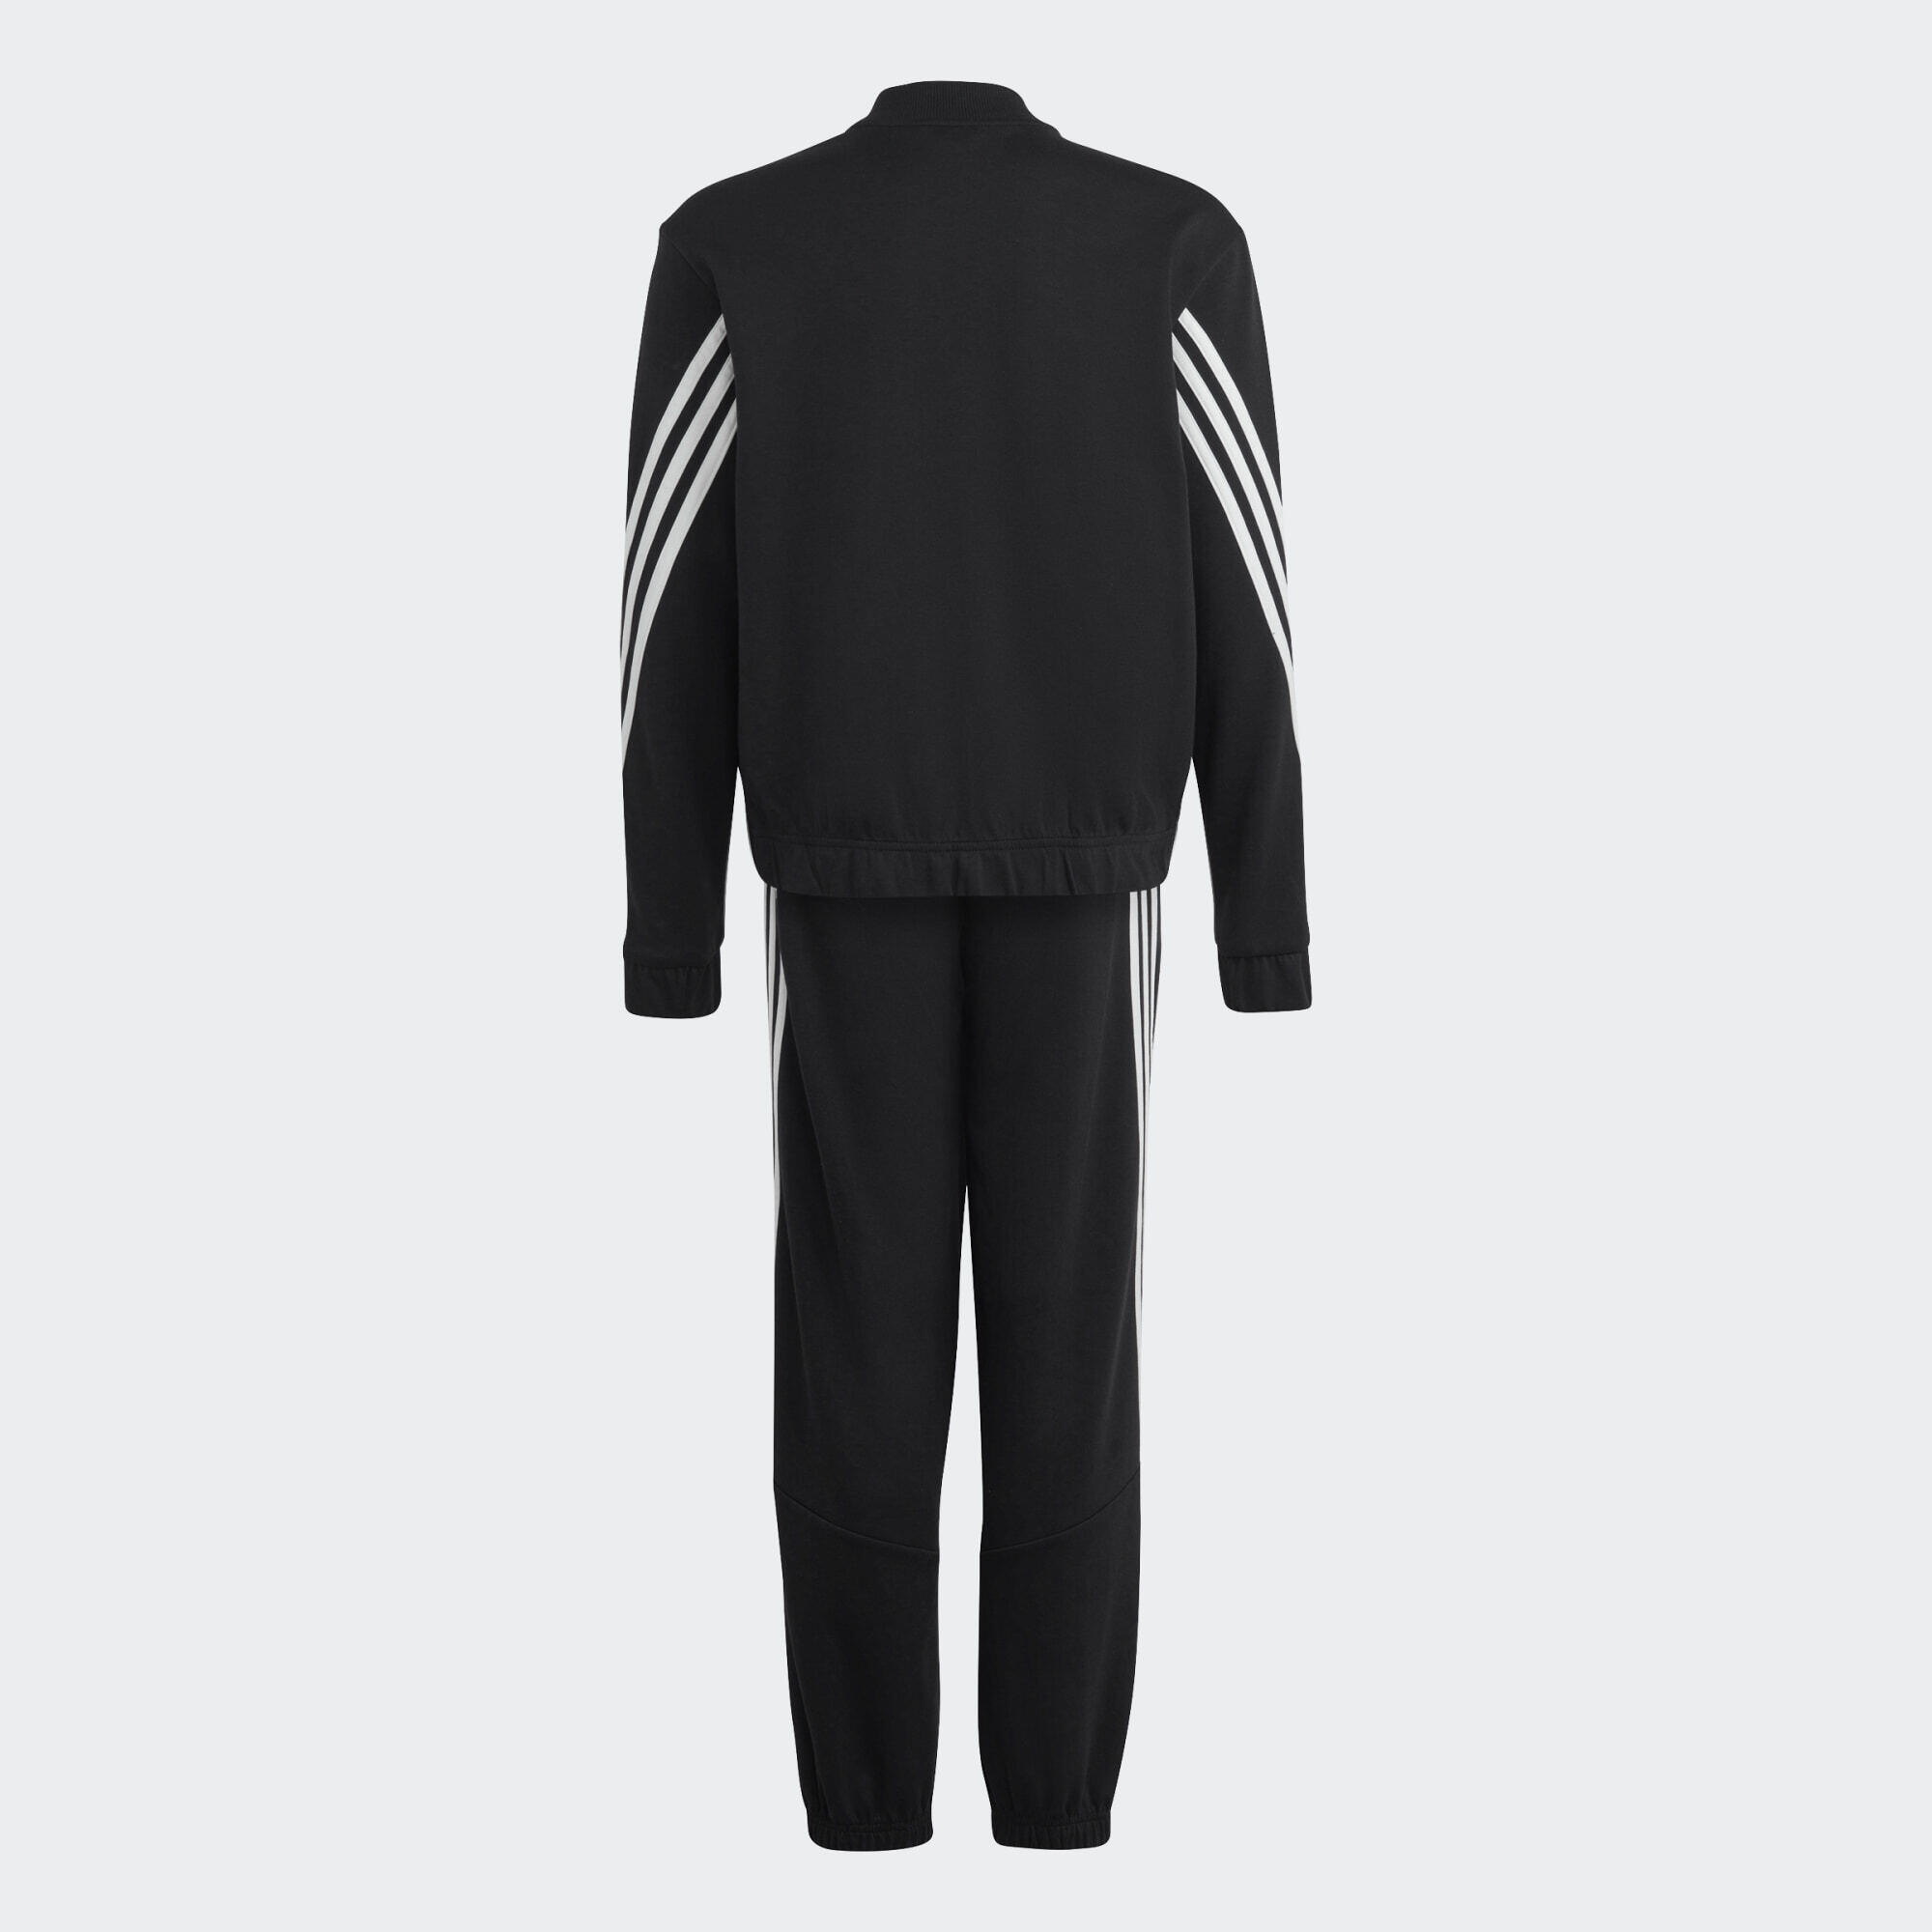 Future Icons 3-Stripes Track Suit 7/7